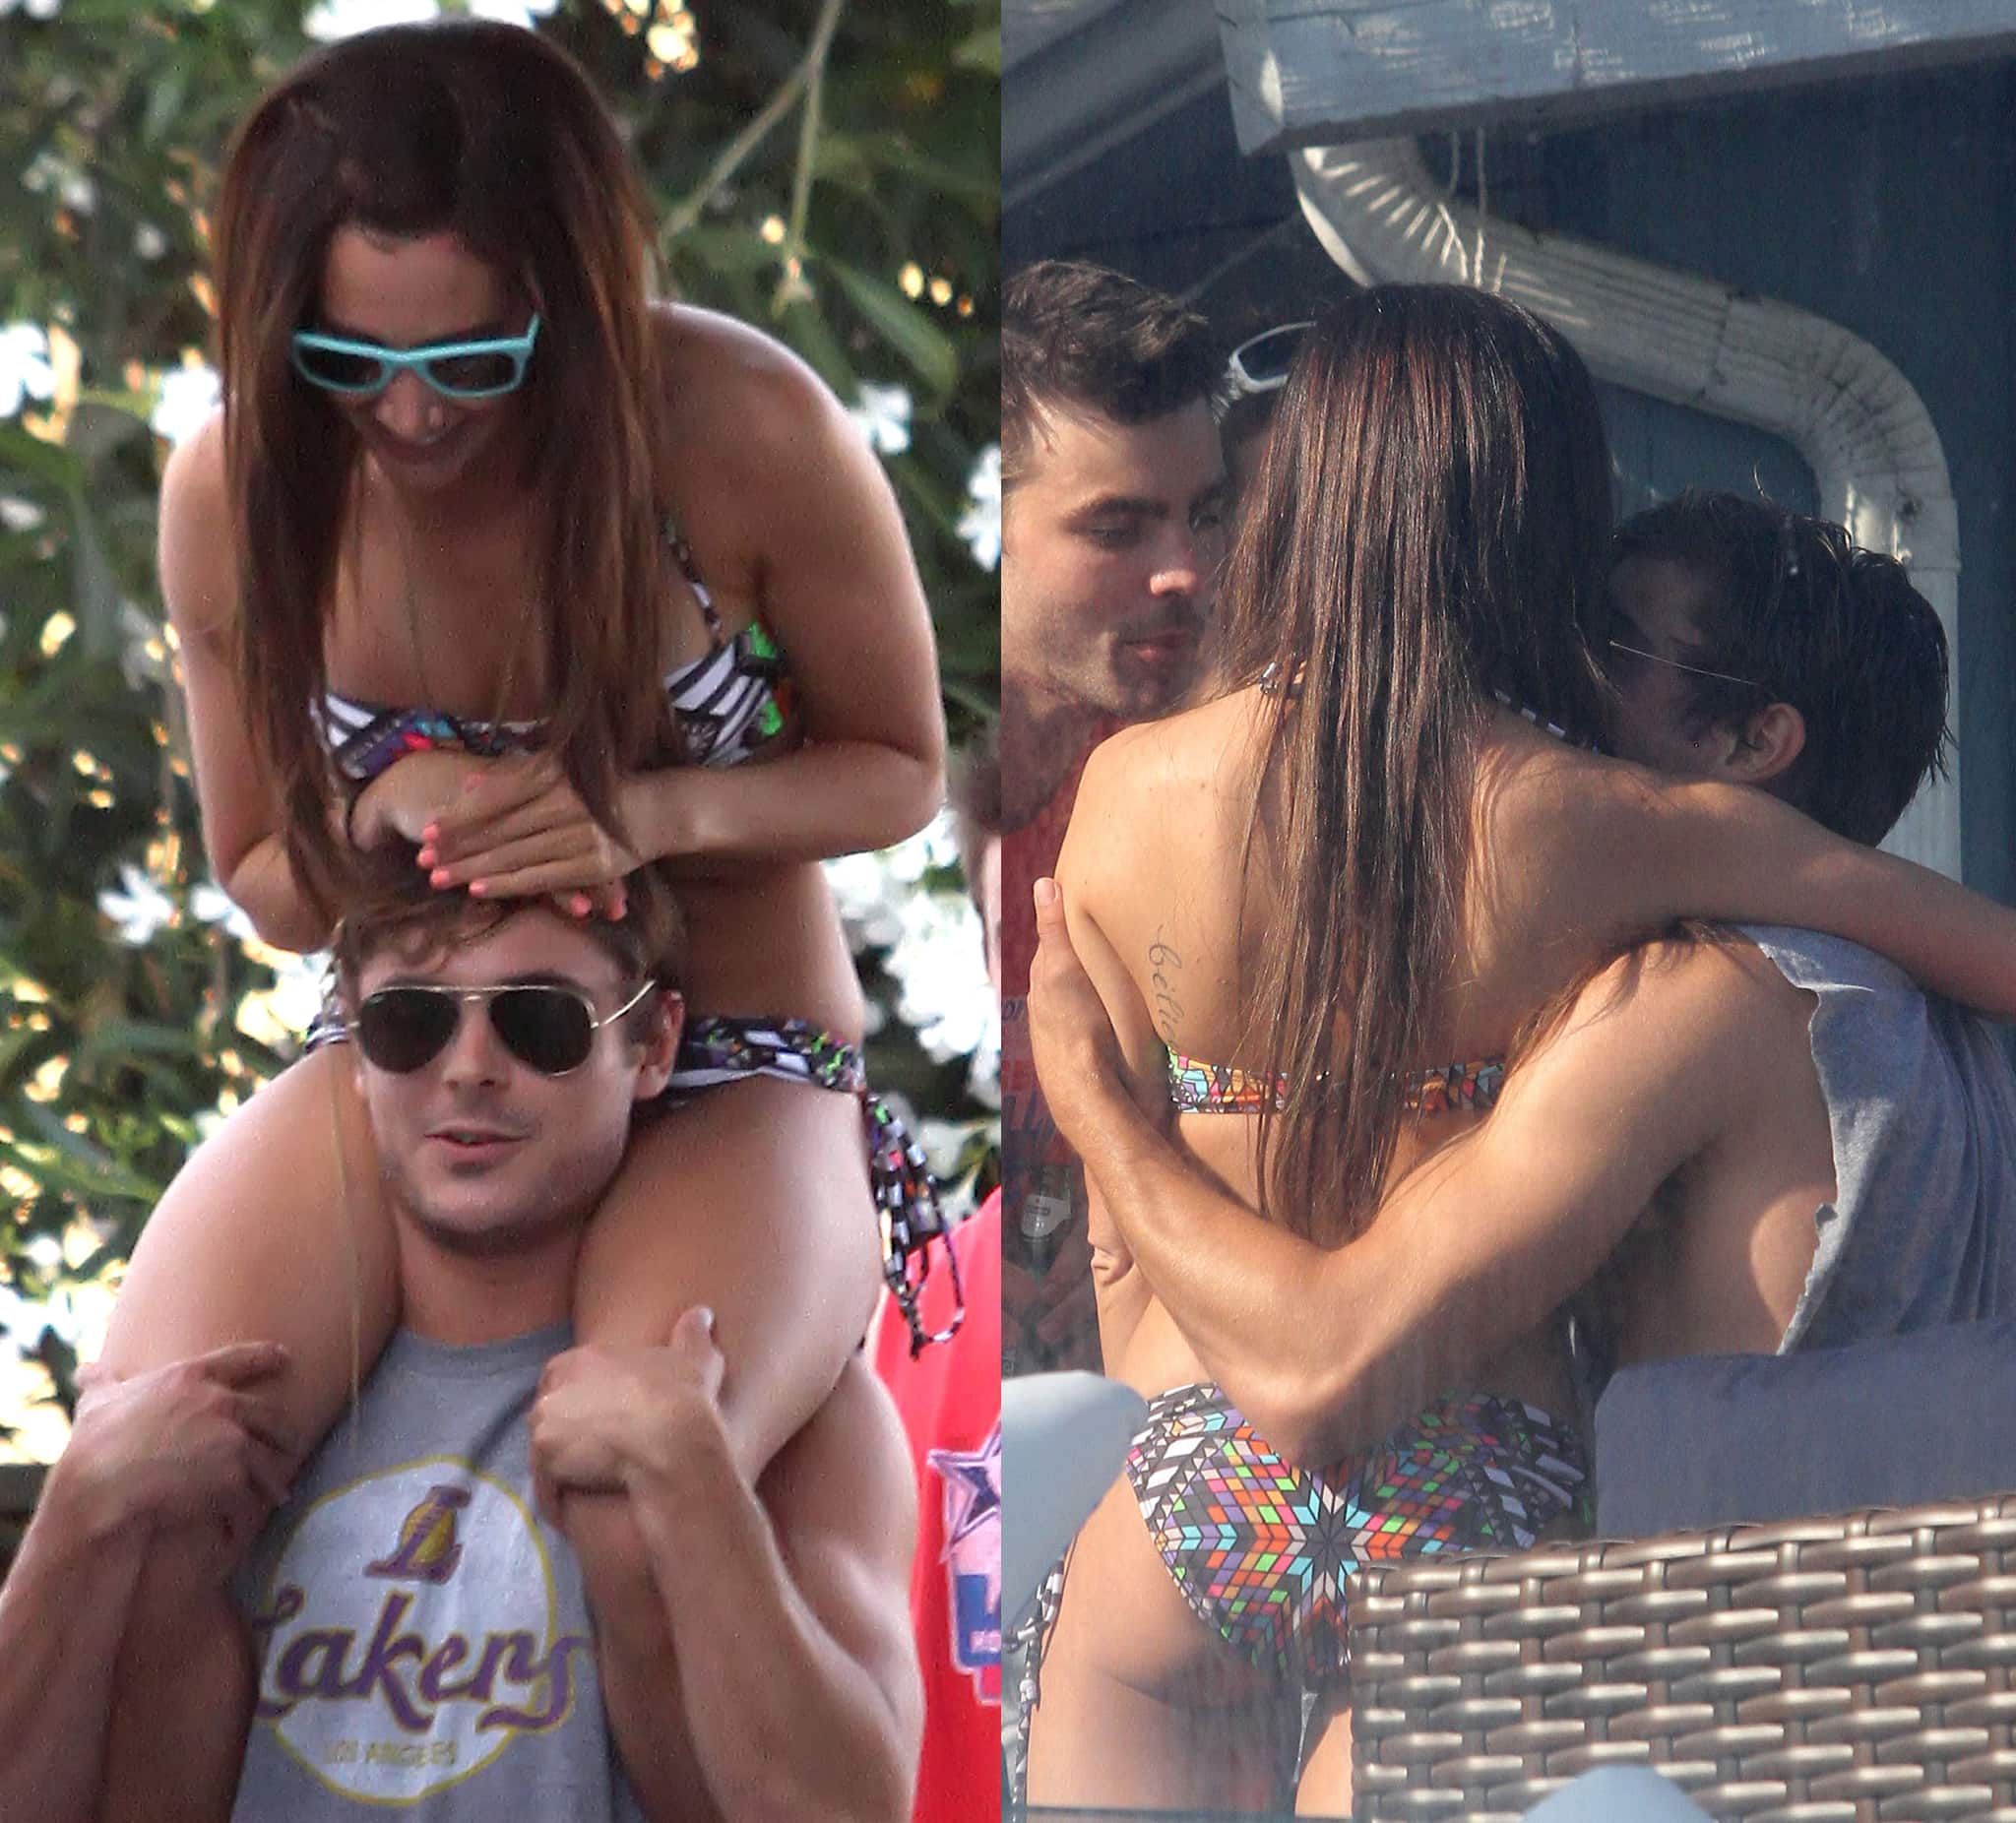 Ashley Tisdale and Zac Efron get close in Malibu on Ashley's birthday in 2011